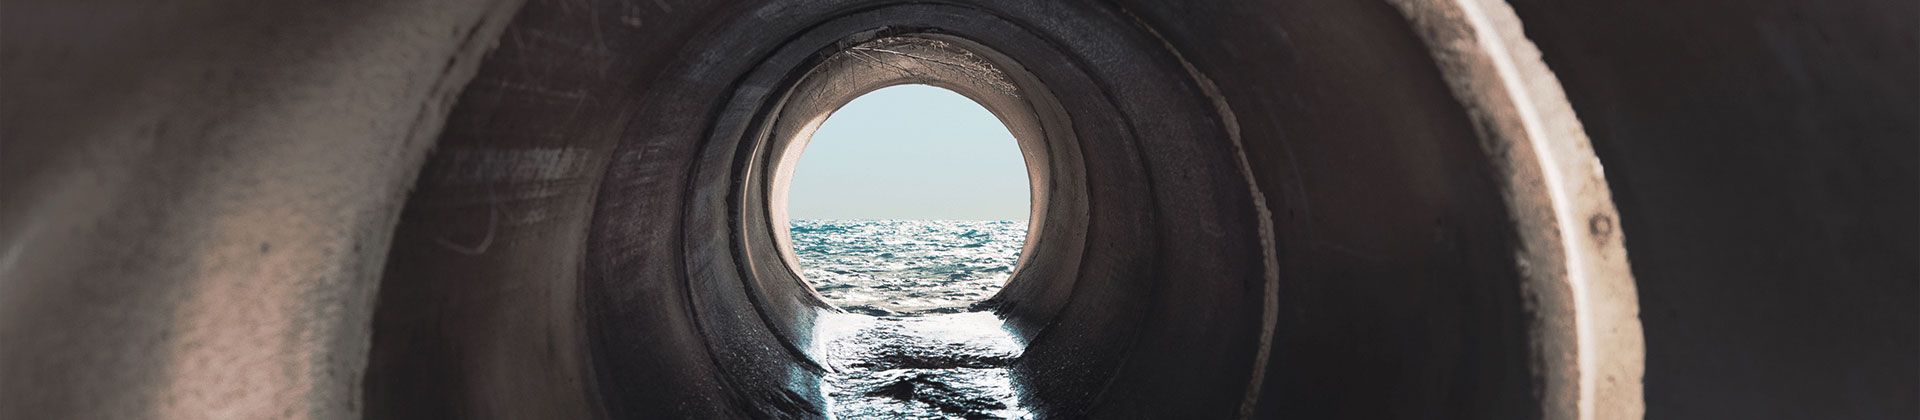 Inside view of a long effluent sewer pipe with a body of water visible at the mouth of the pipe.